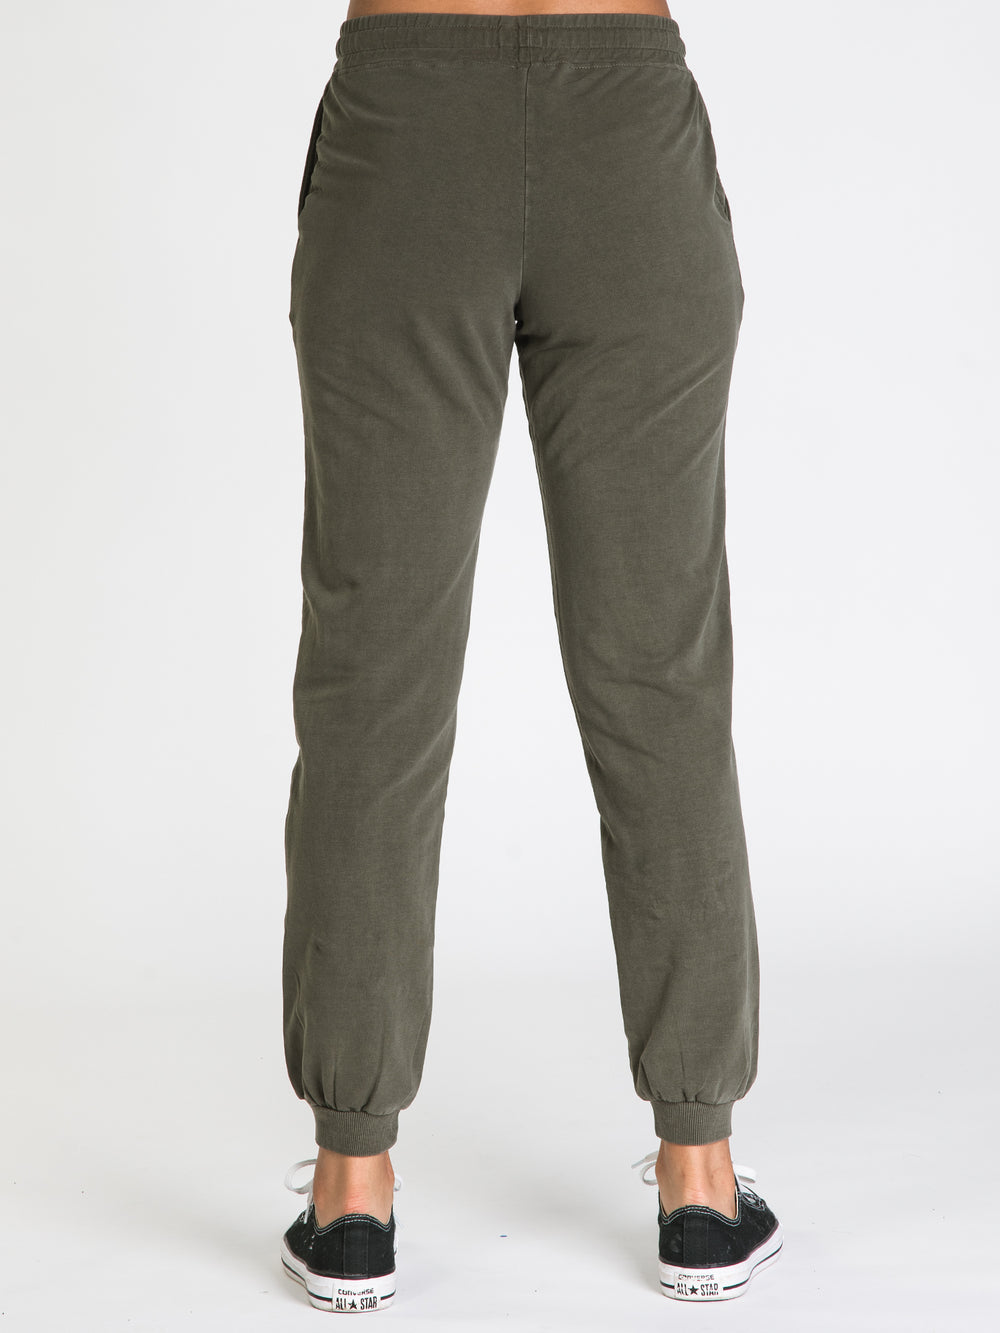 TENTREE FRENCH TERRY FULTON JOGGER  - CLEARANCE